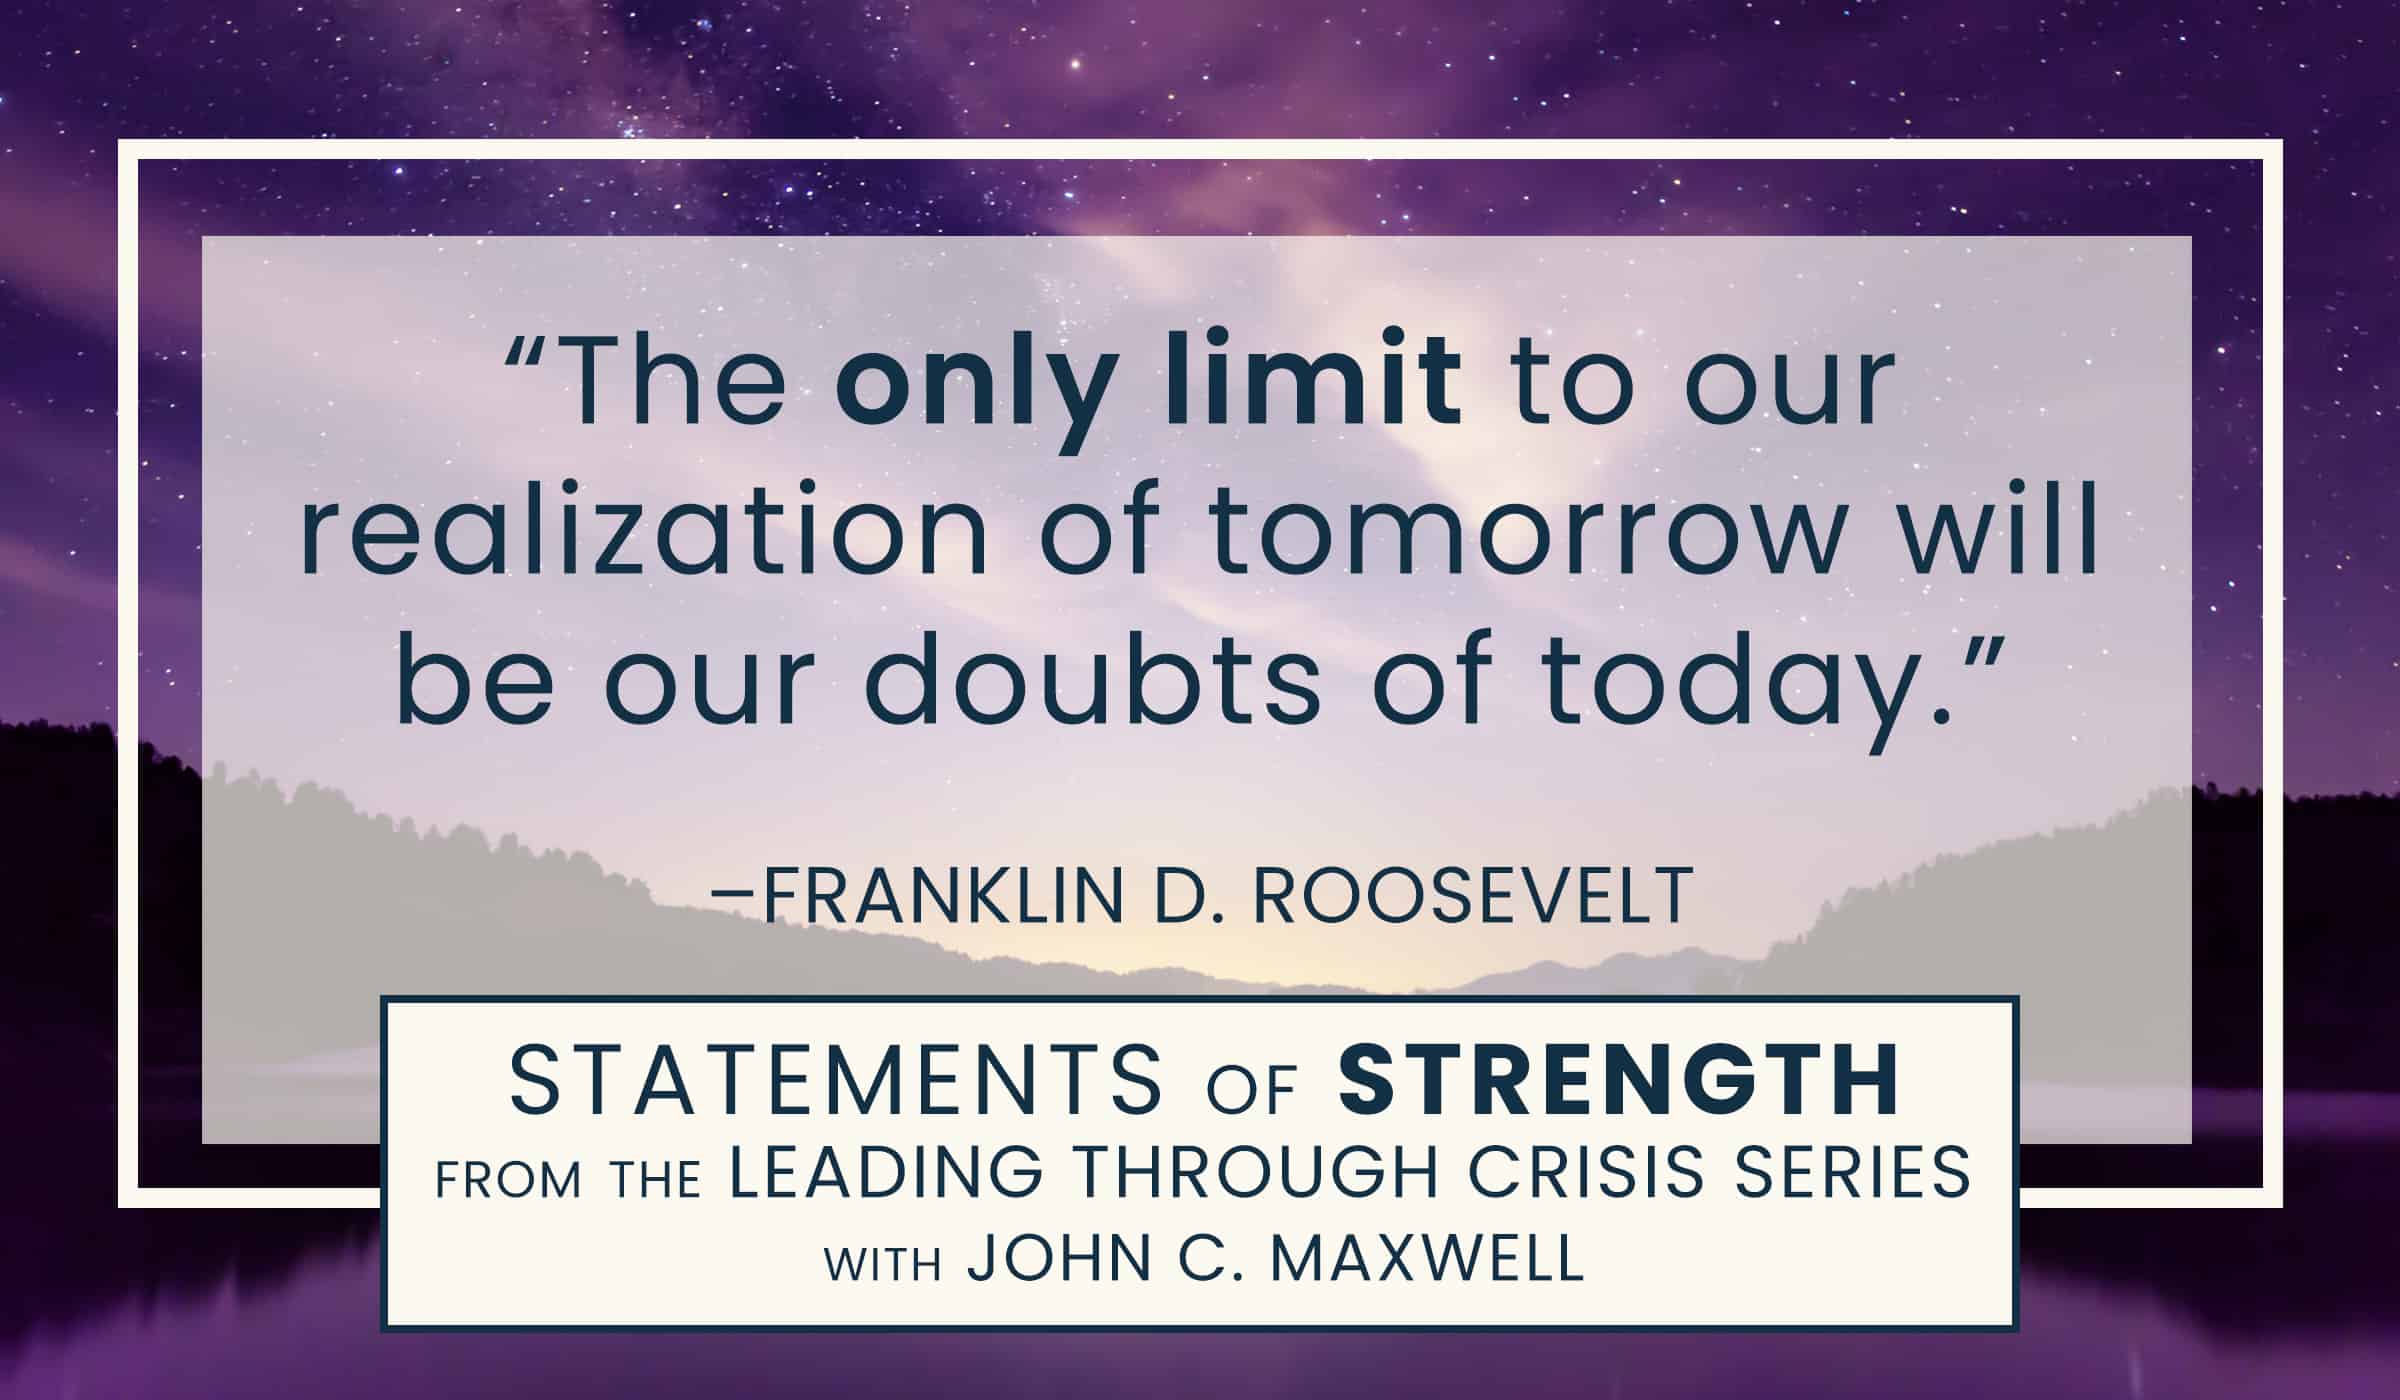 image of quotation picture with text quote by Franklin D Roosevelt